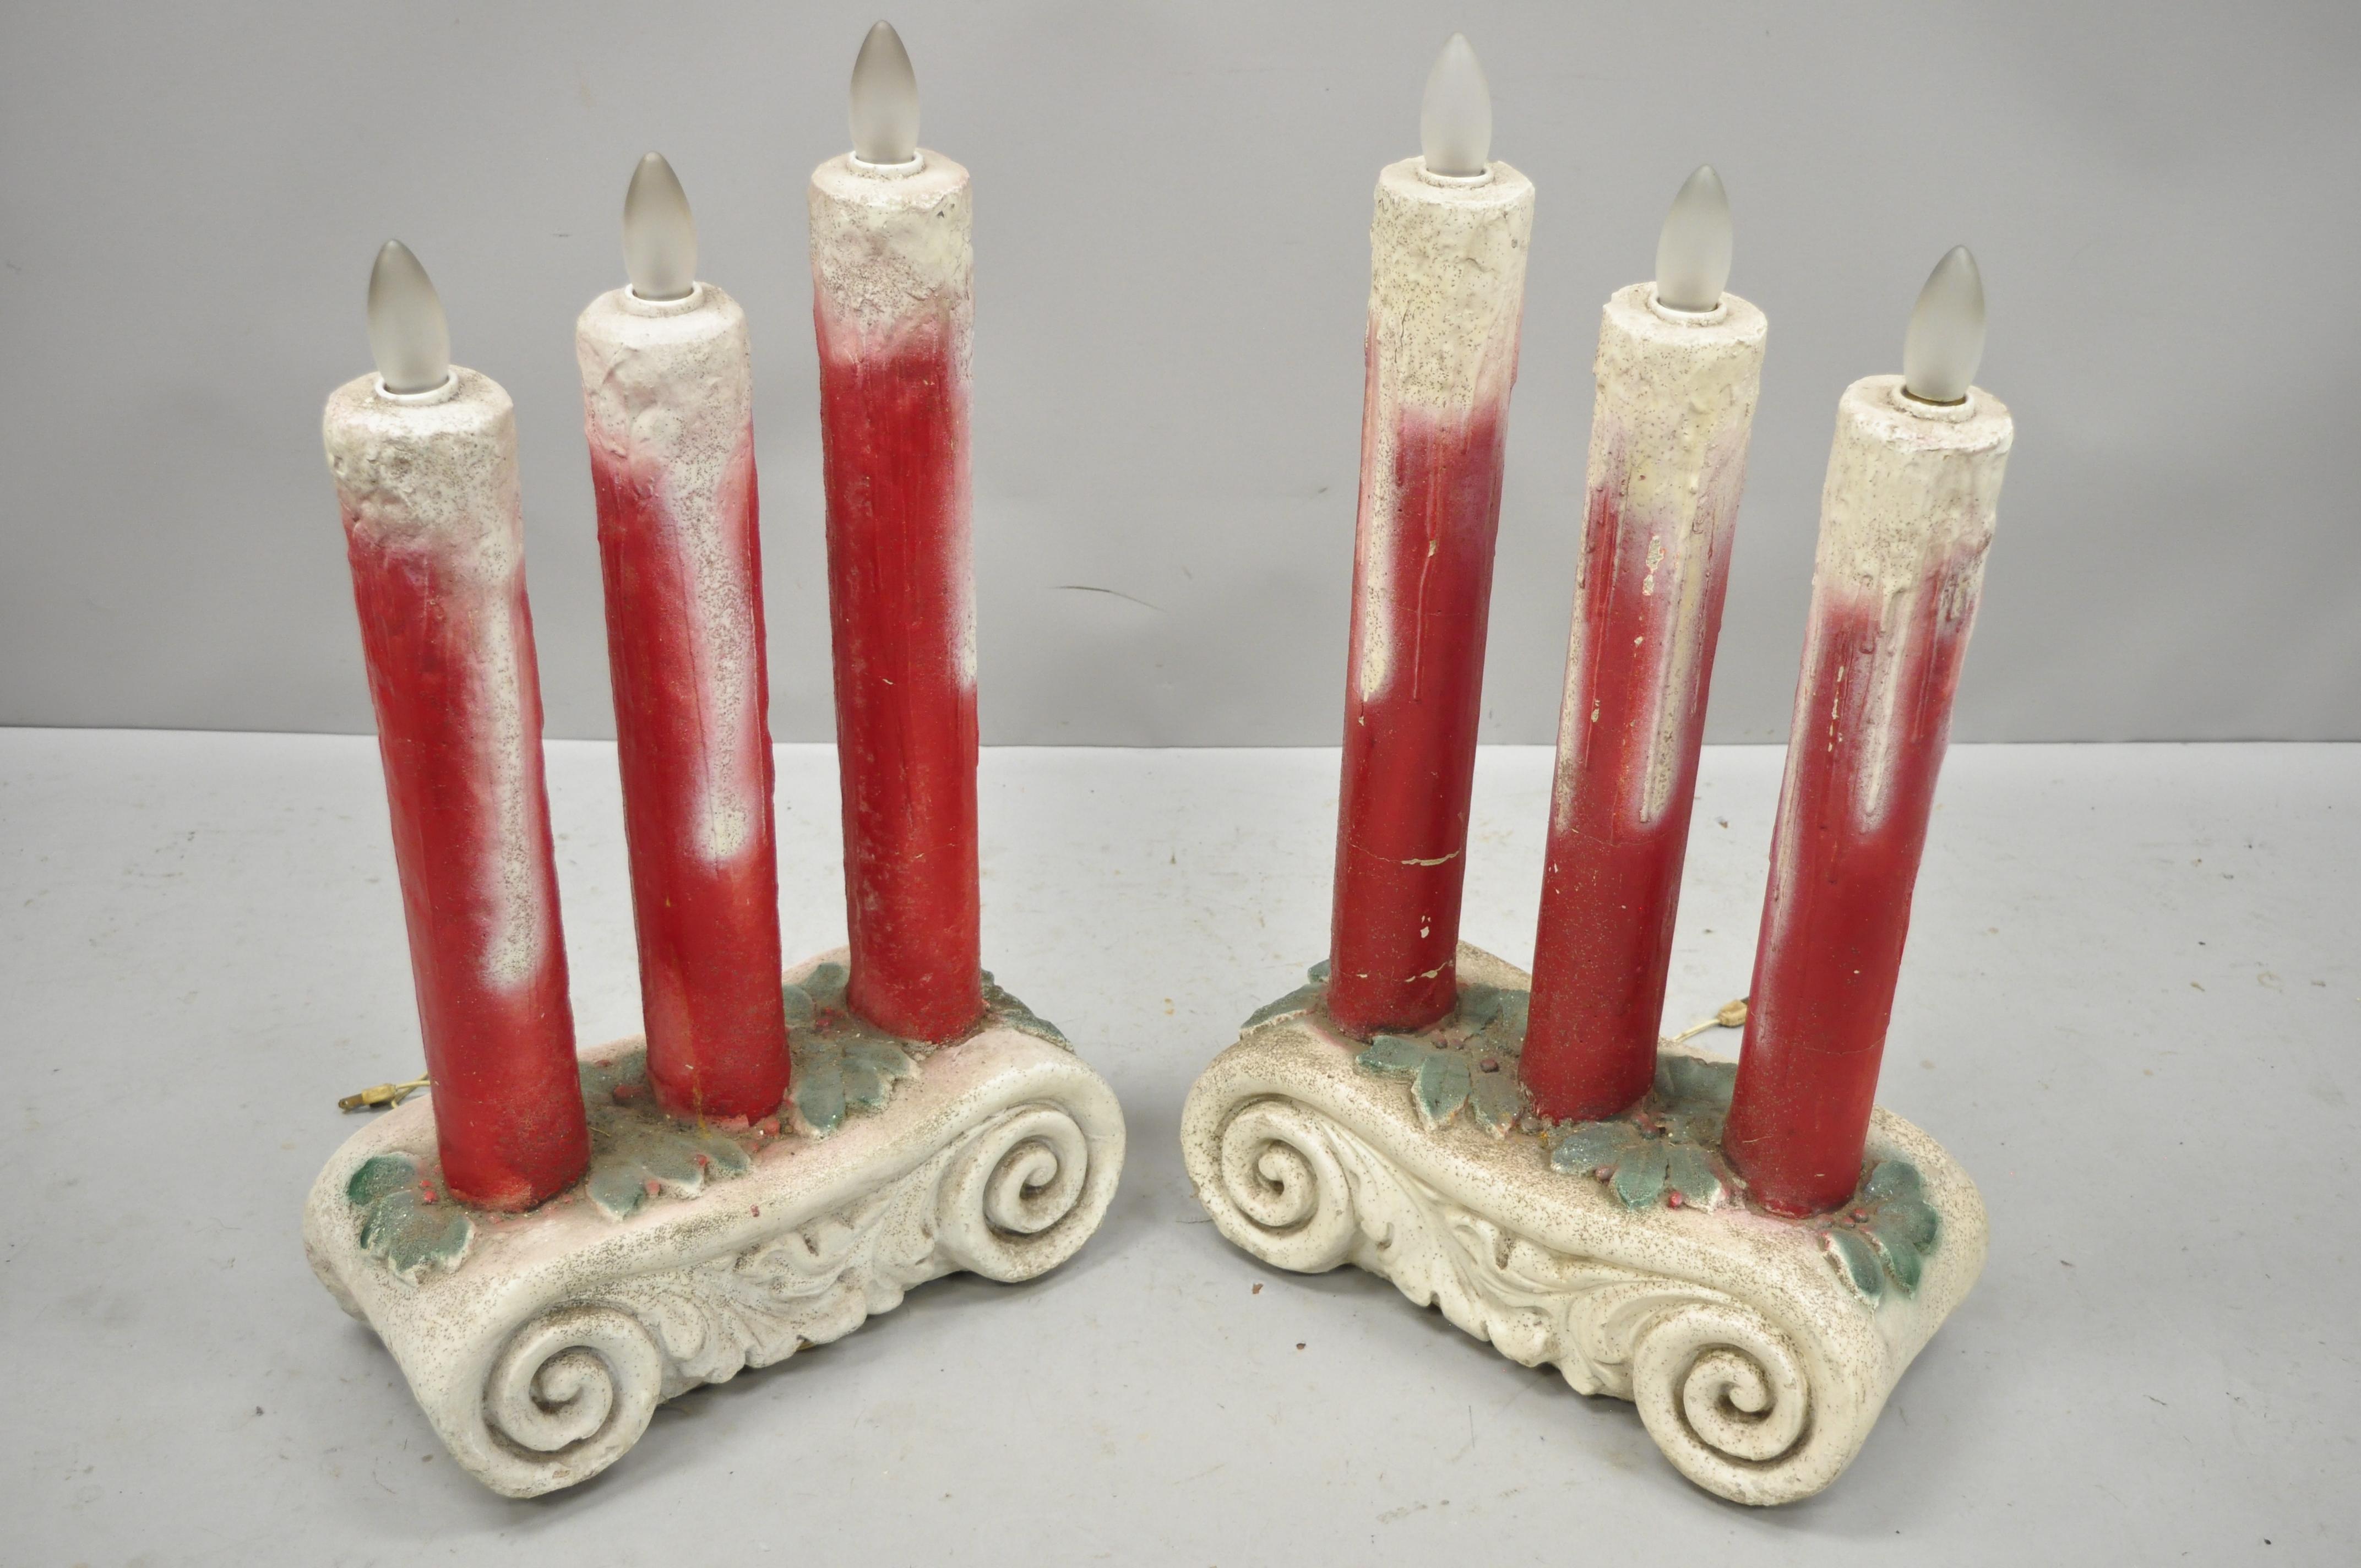 Pair of cast concrete 3 light Christmas candle candelabra architectural elements. Item features cast cement forms, 3 lights each, scrolling pedestal base, great style and form, approximately 80 lbs each, circa mid-20th century. Measurements: 25.75